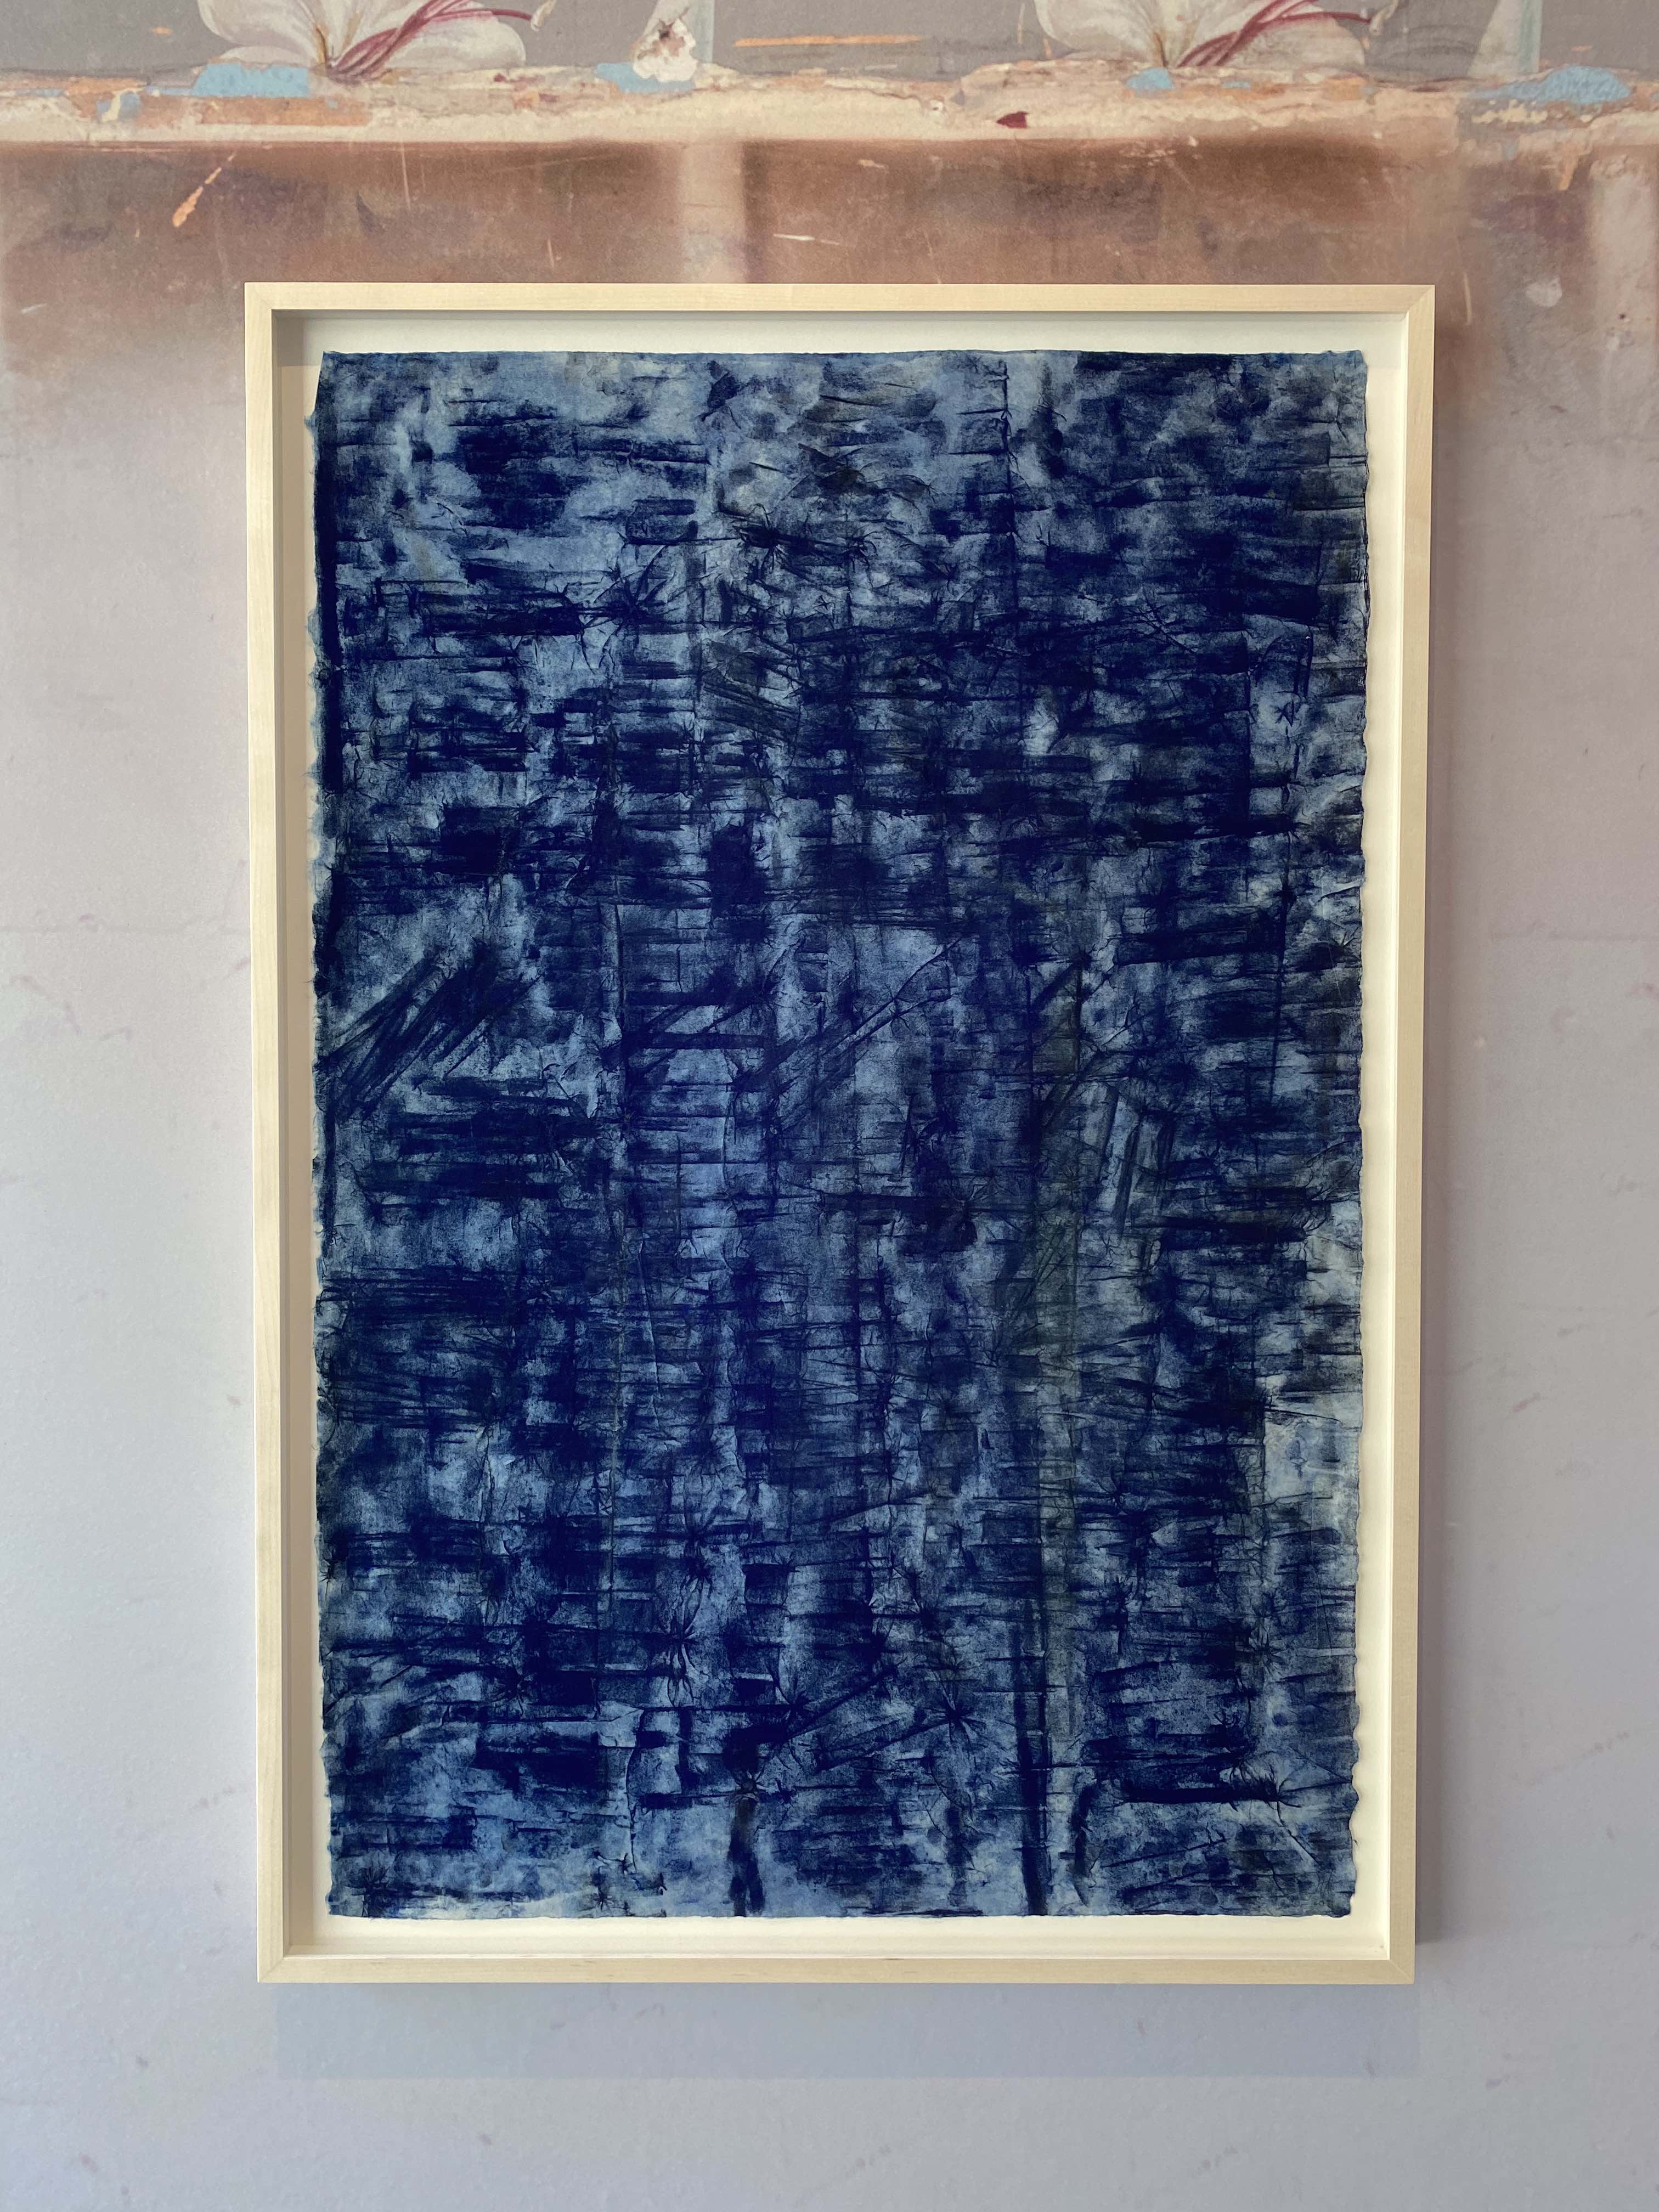 [Image description: A photograph of a work by Jason Moran hung on a wall. The painting features dark blue dashes overlapped on top of each other on white gampi paper. The painting is hung in a white frame.]